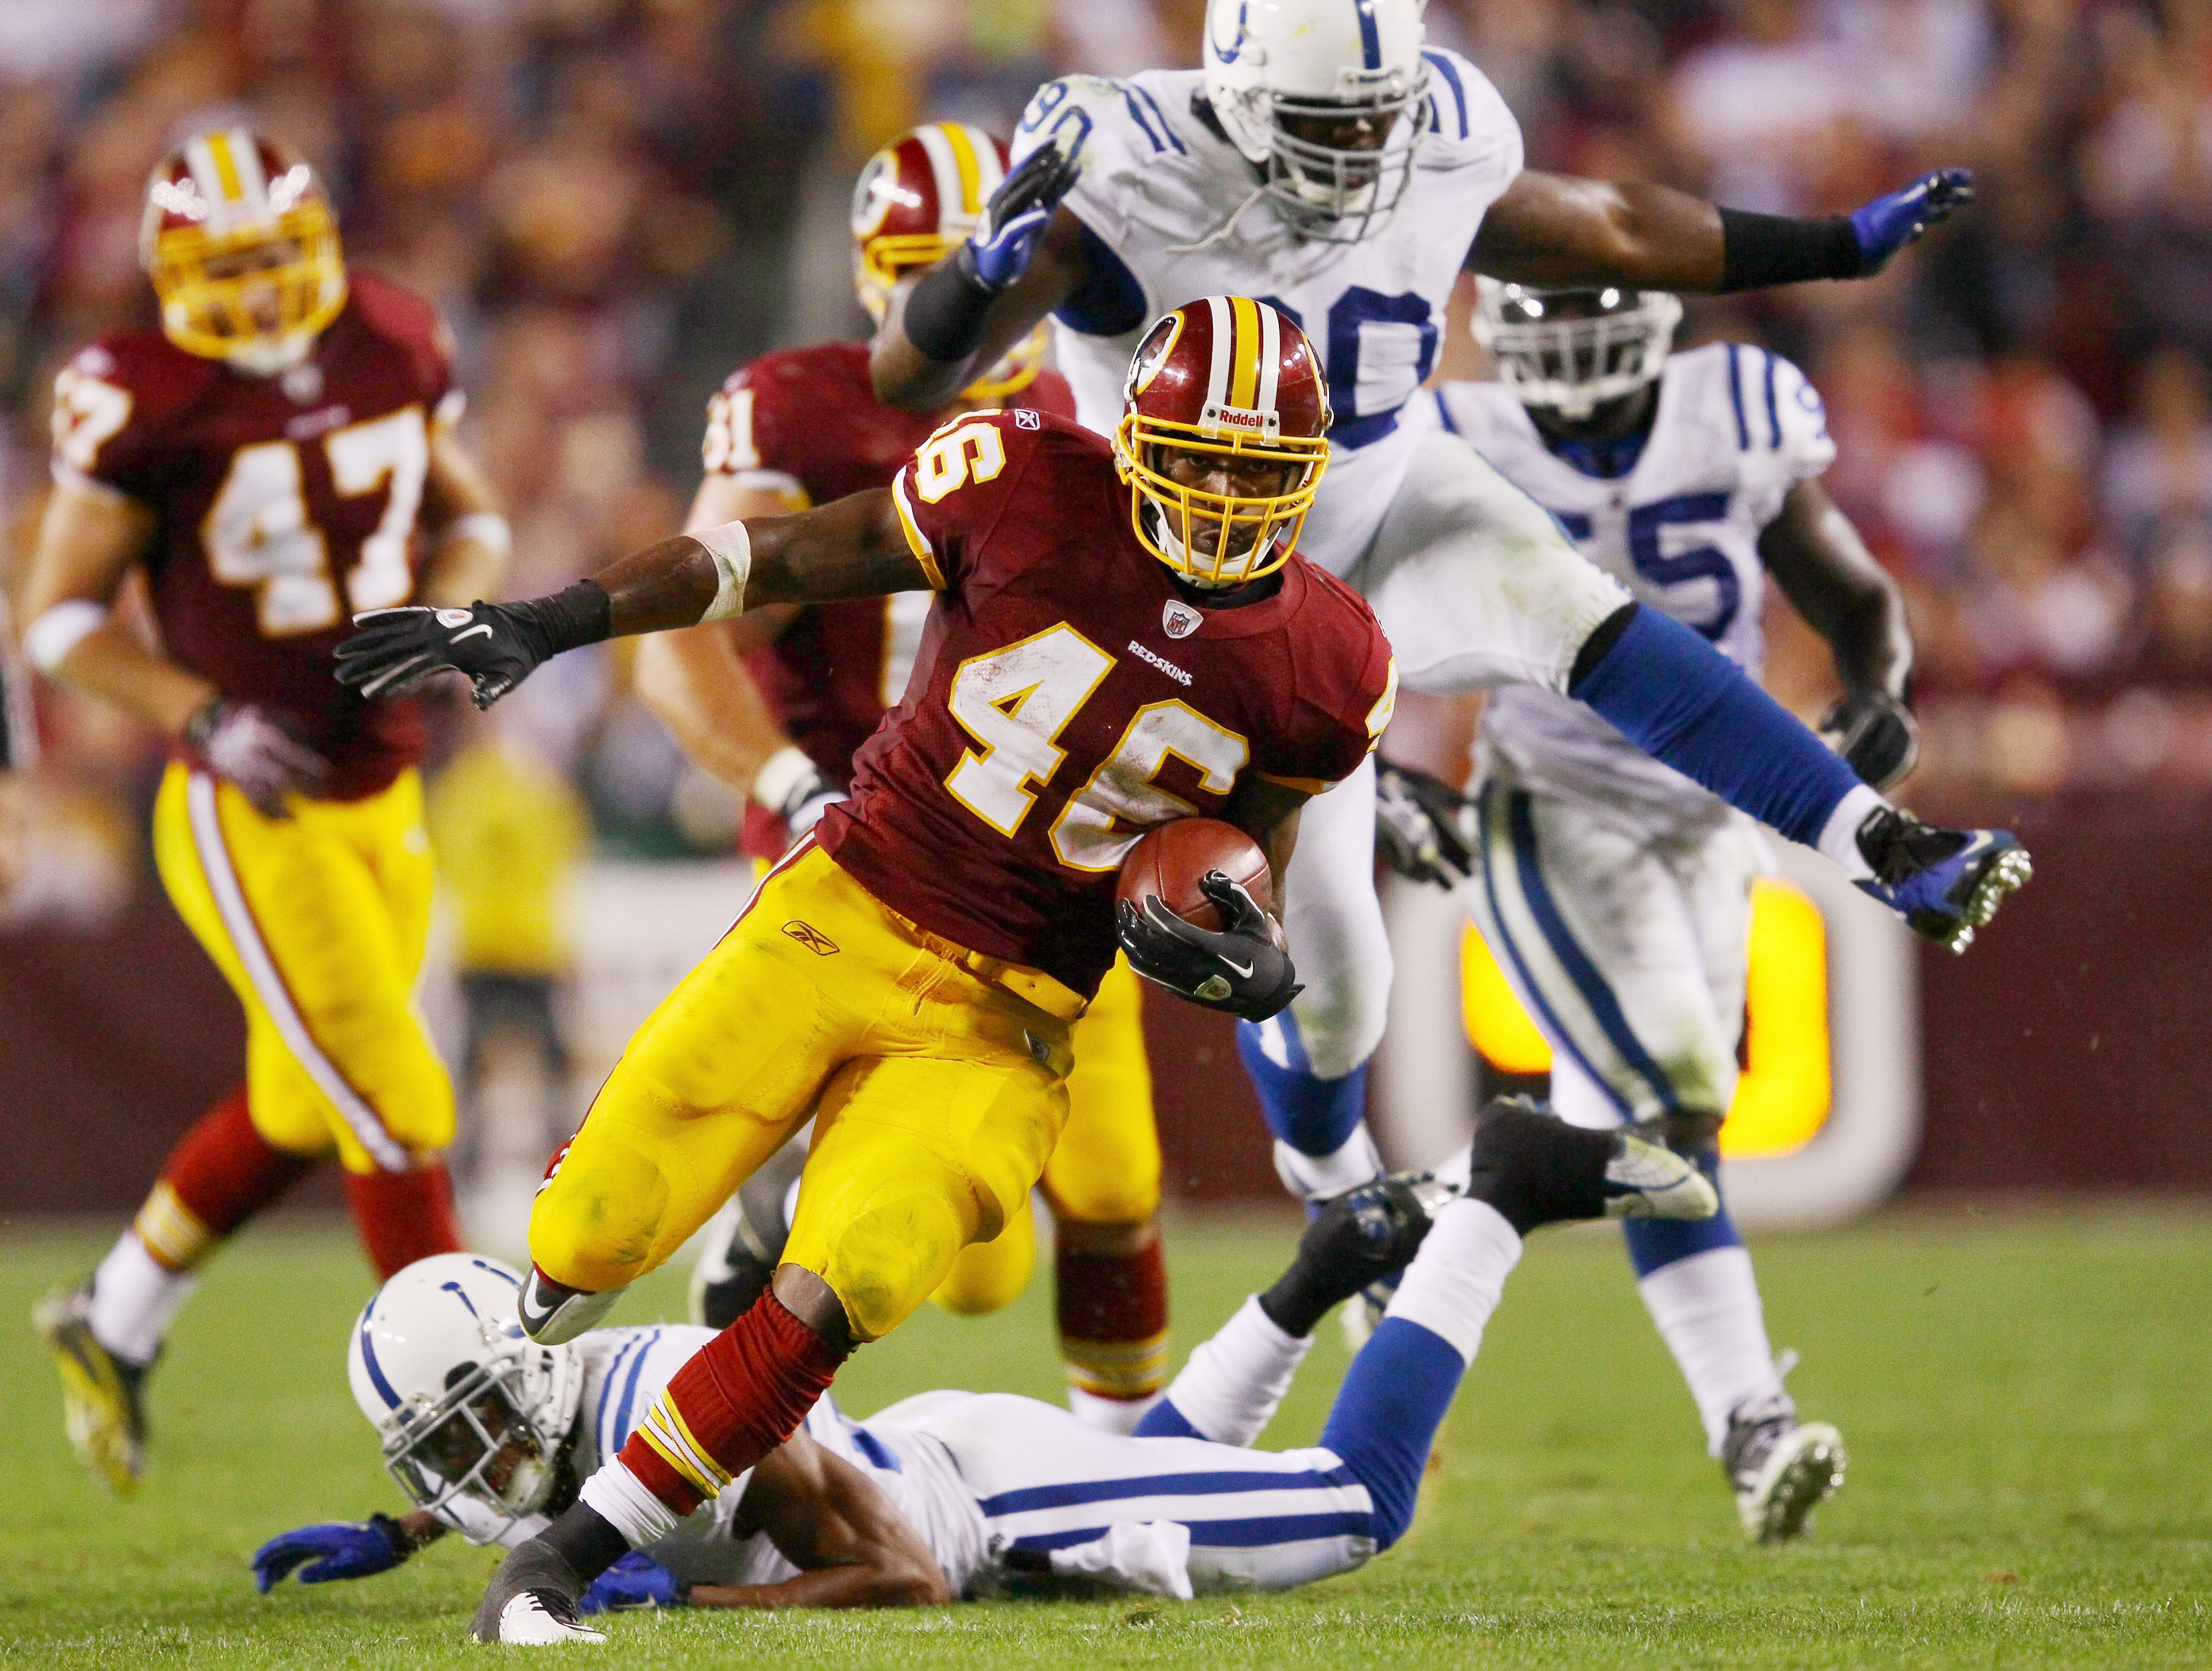 LANDOVER, MD - OCTOBER 17:  Ryan Torain #46 of the Washington Redskins heads up field for a long gain against the Indianapolis Colts at FedExField on October 17, 2010 in Landover, Maryland. The Colts won the game 27-24.  (Photo by Win McNamee/Getty Images